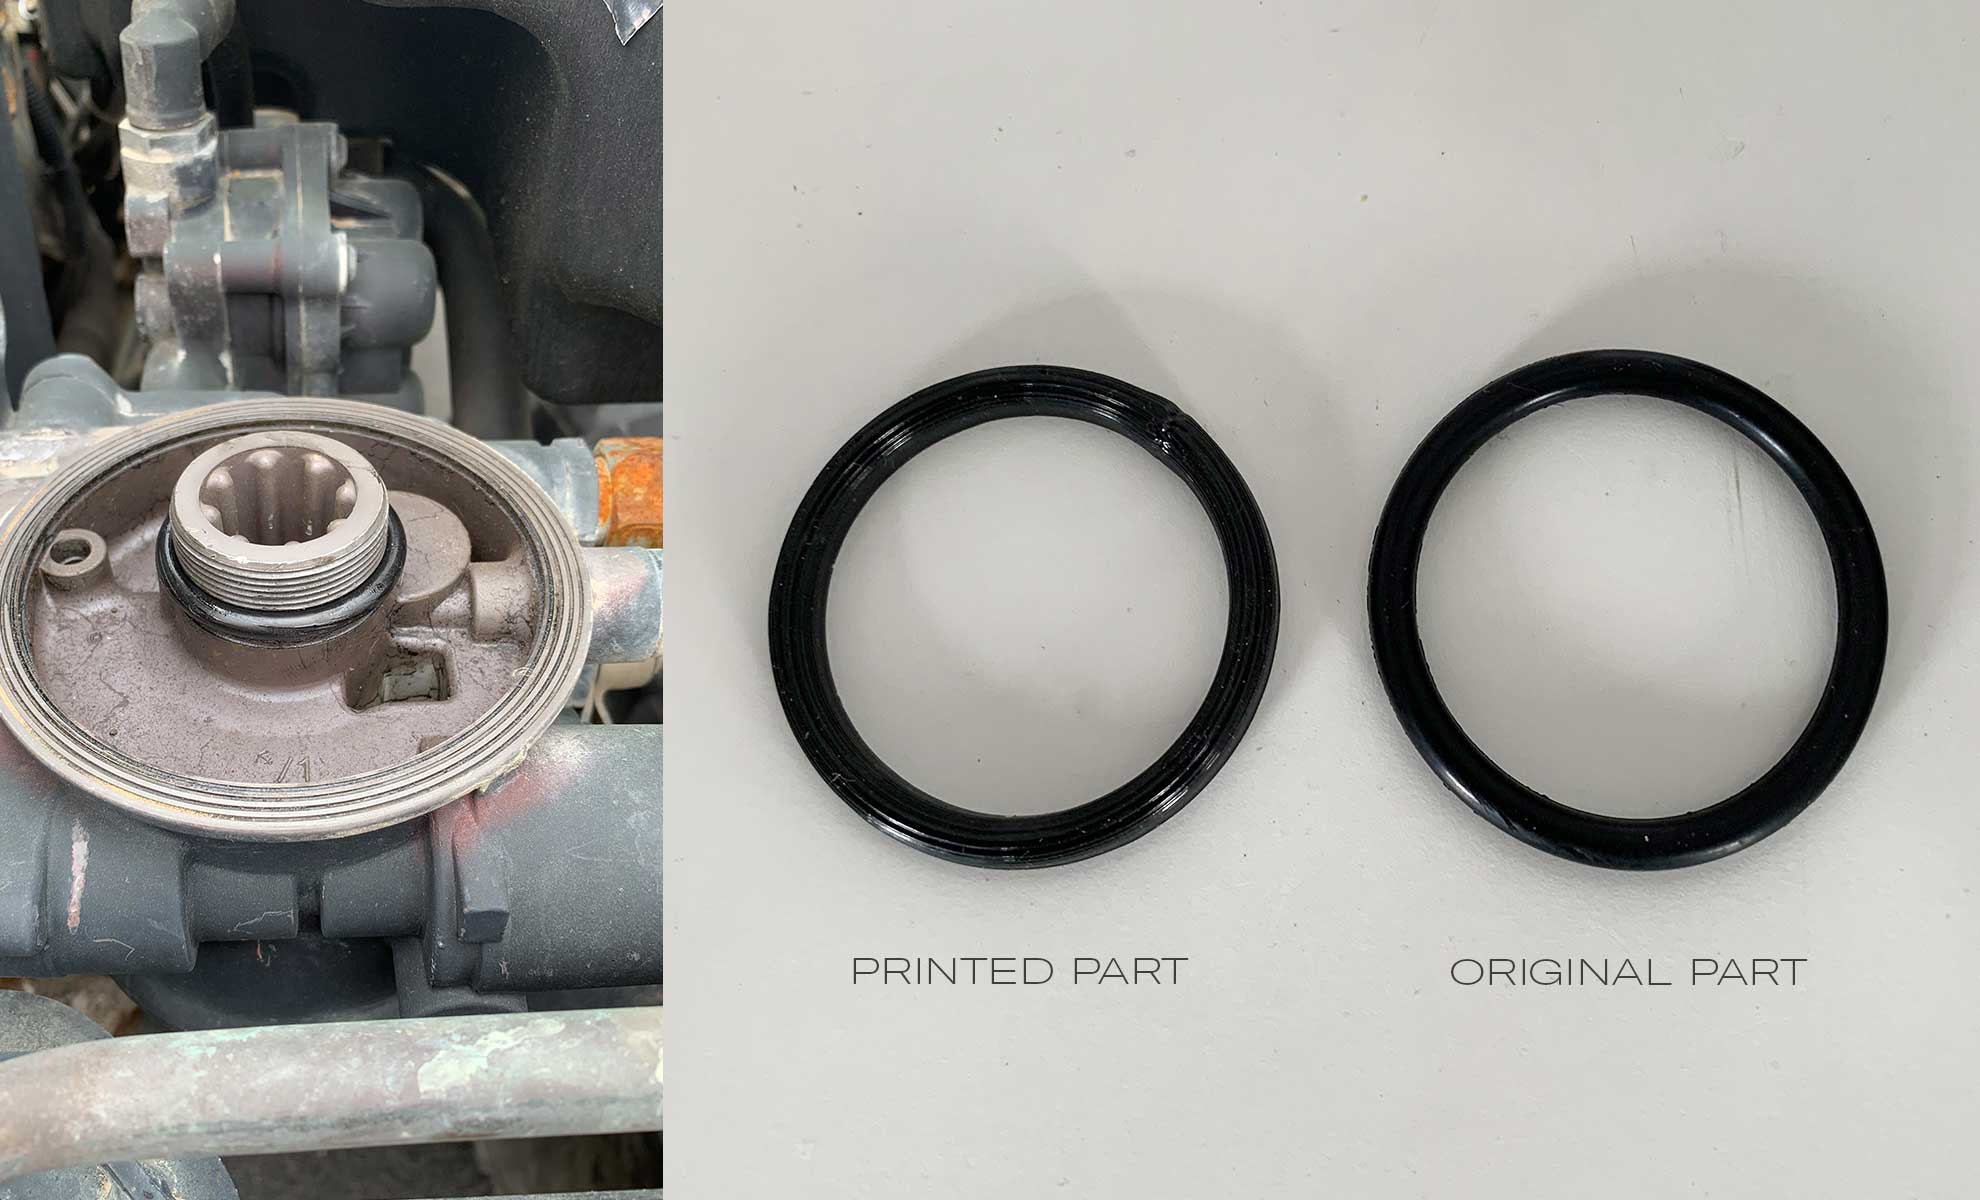 O-Ring for engine component – printed in PU vs original - Request: Belgian Army